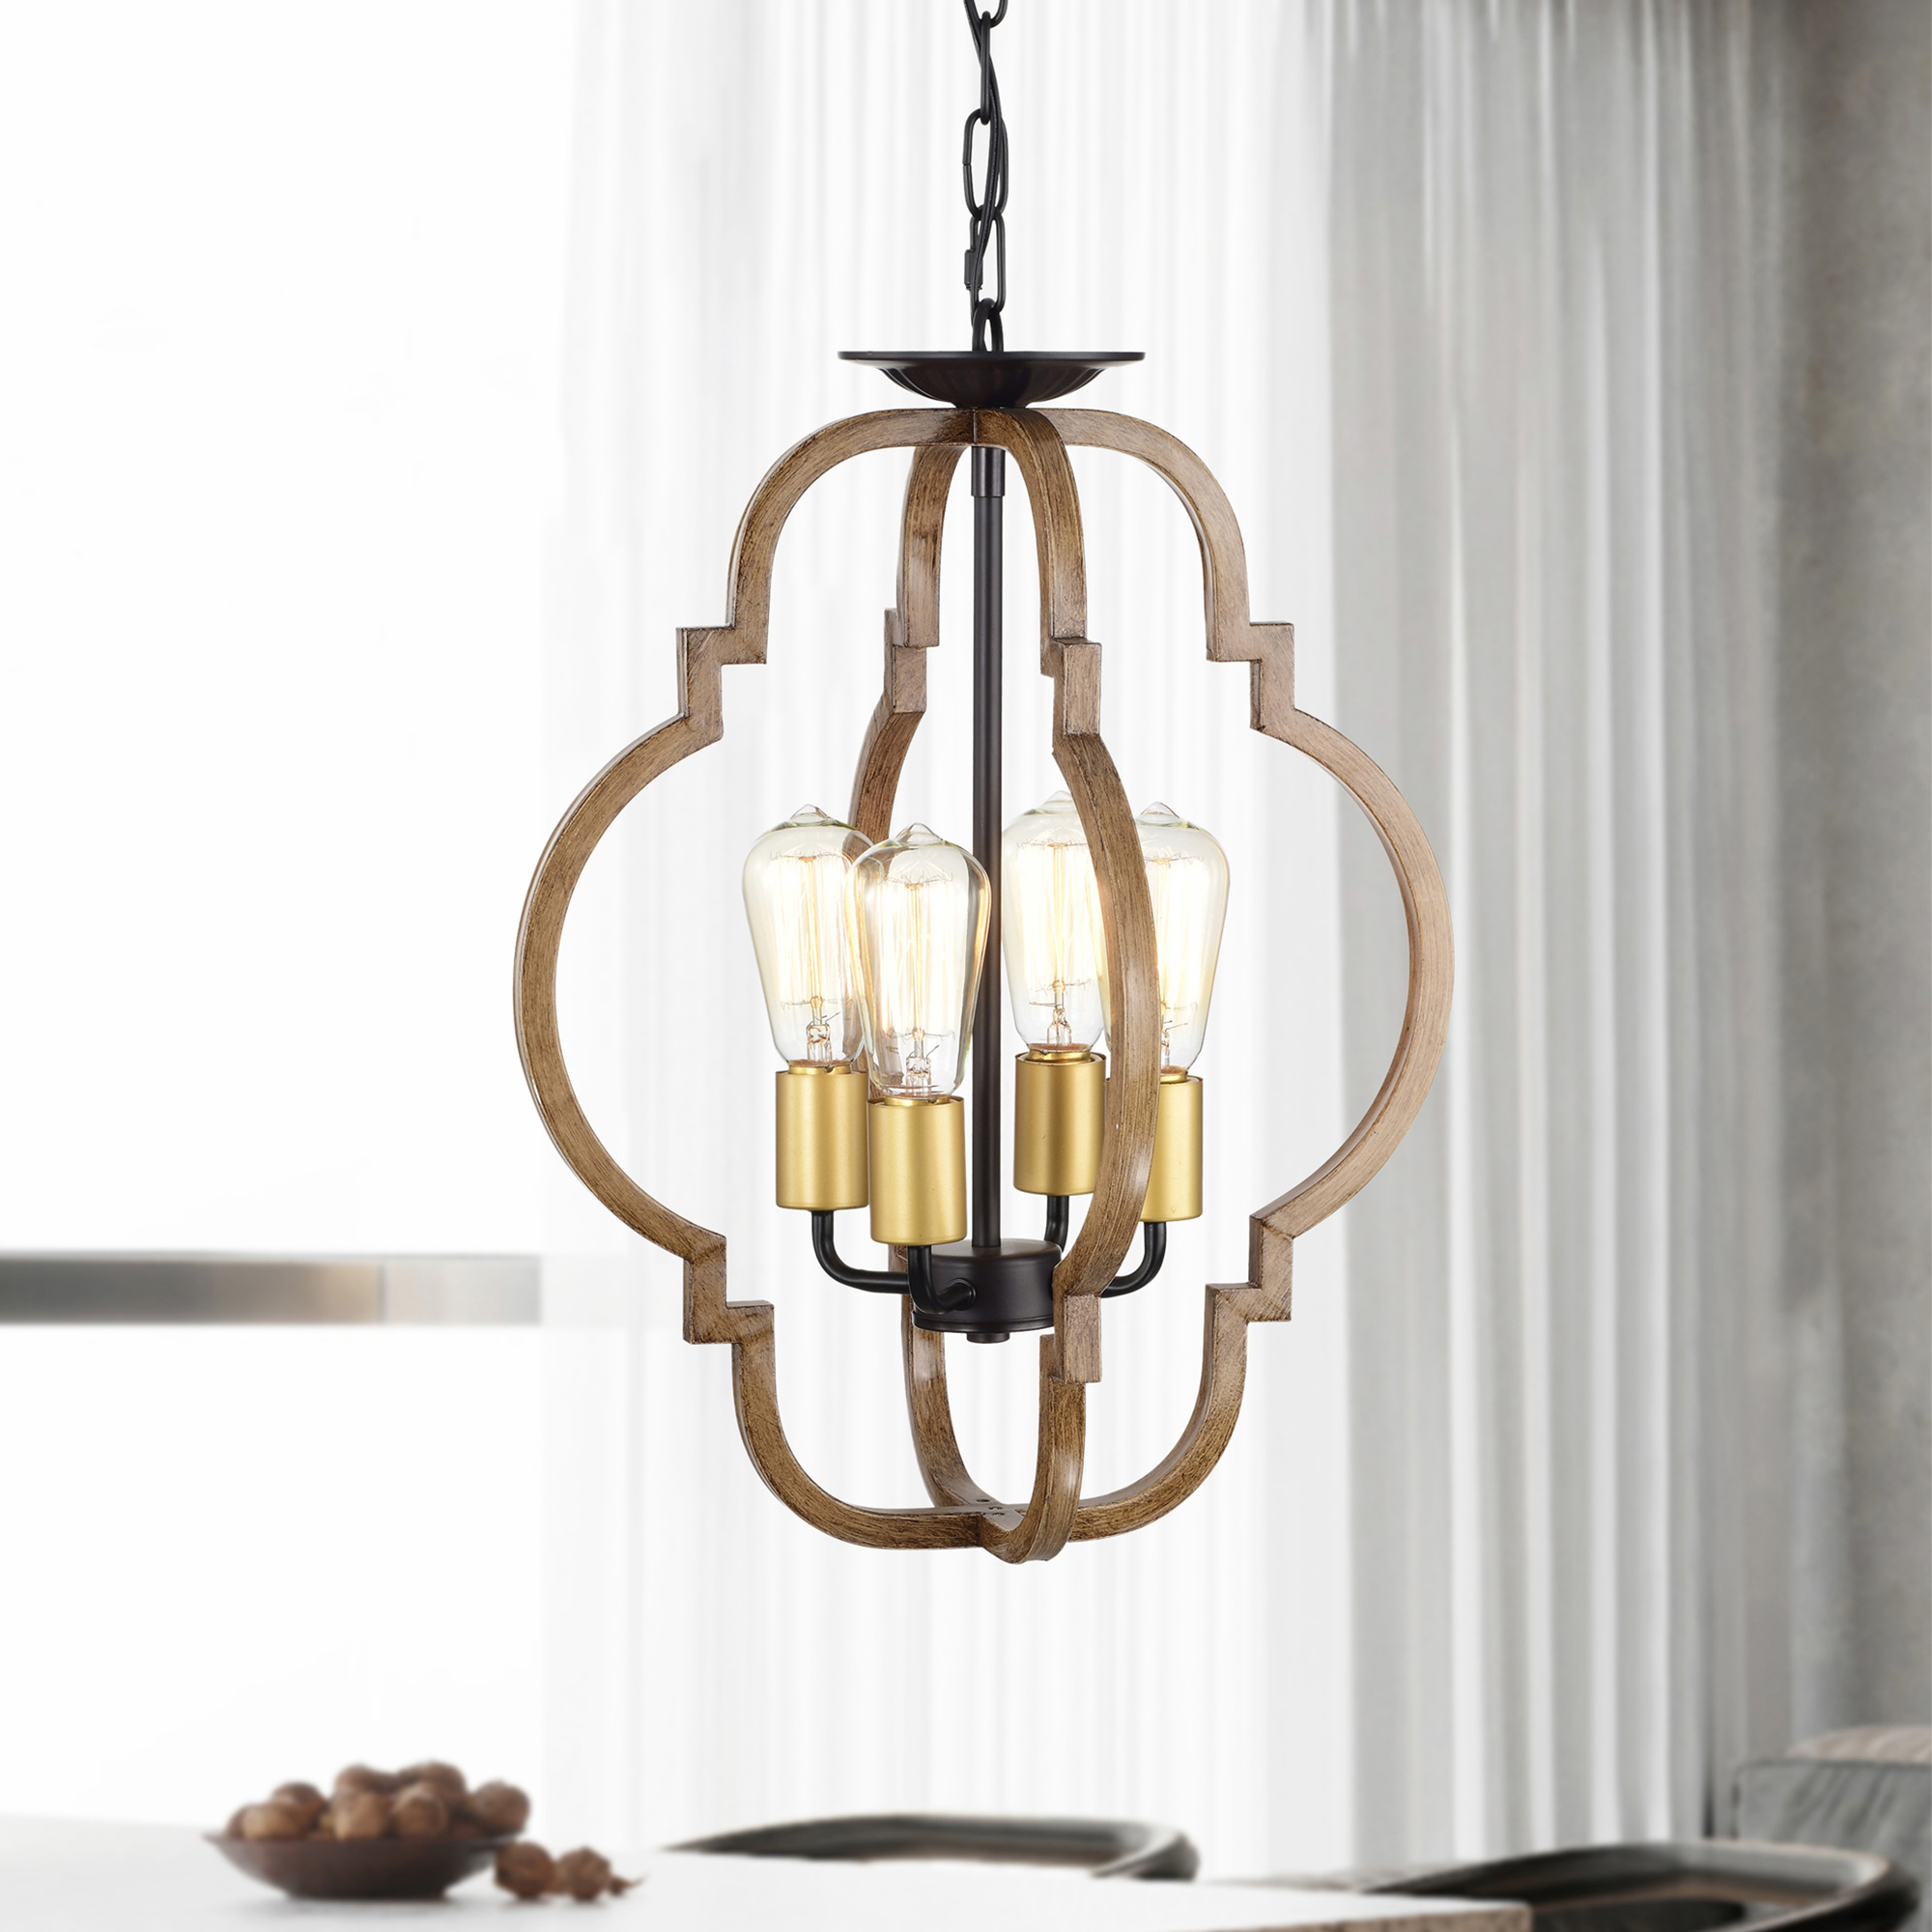 Ason 16 in. 4-Light Indoor Matte Black and Faux Wood Grain Finish Pendant with Light Kit